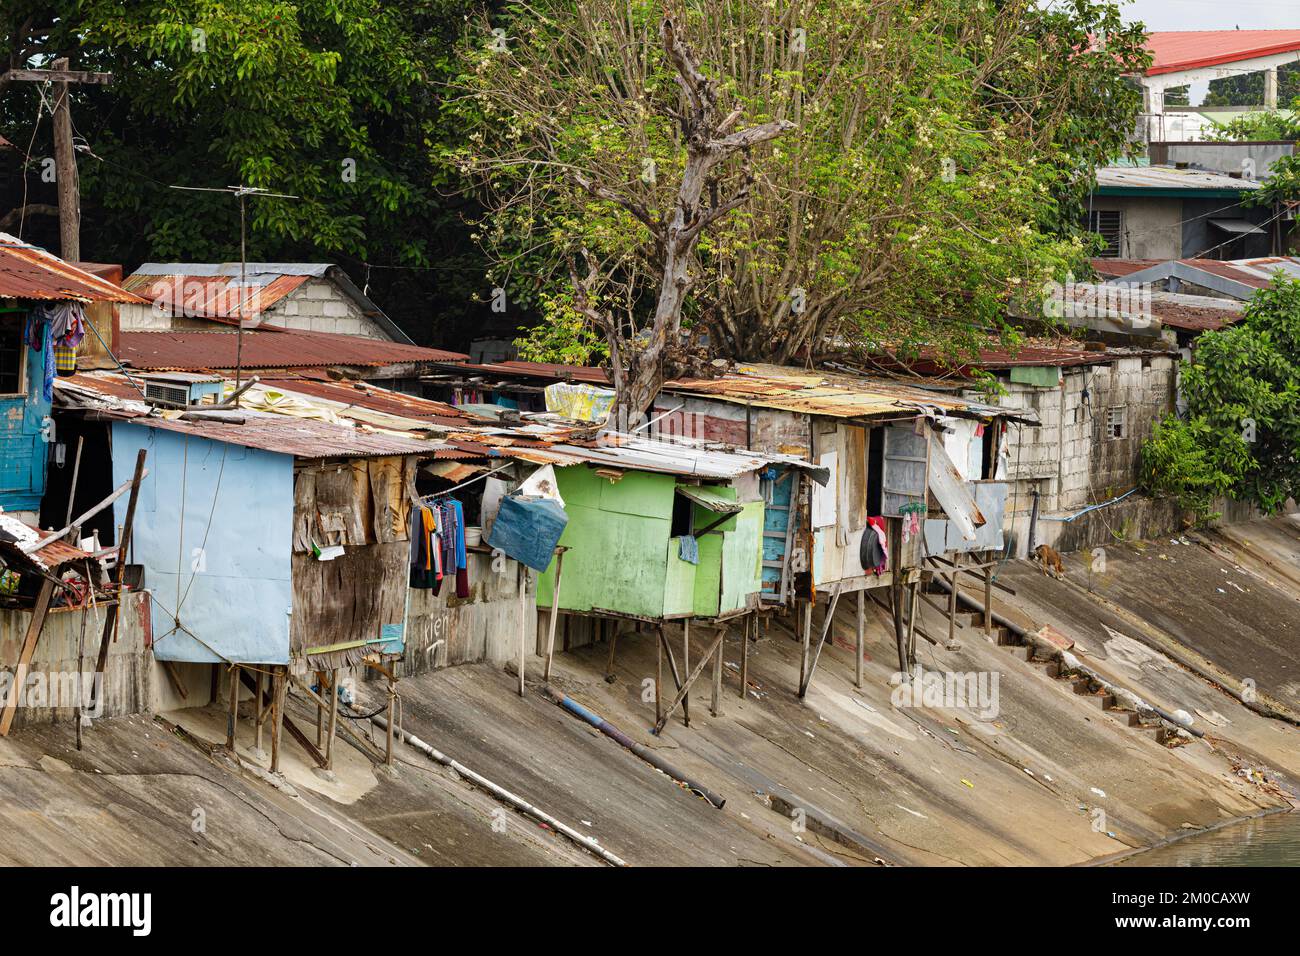 Poor people living in poverty along the canals of Manila Philippines with copy space Stock Photo